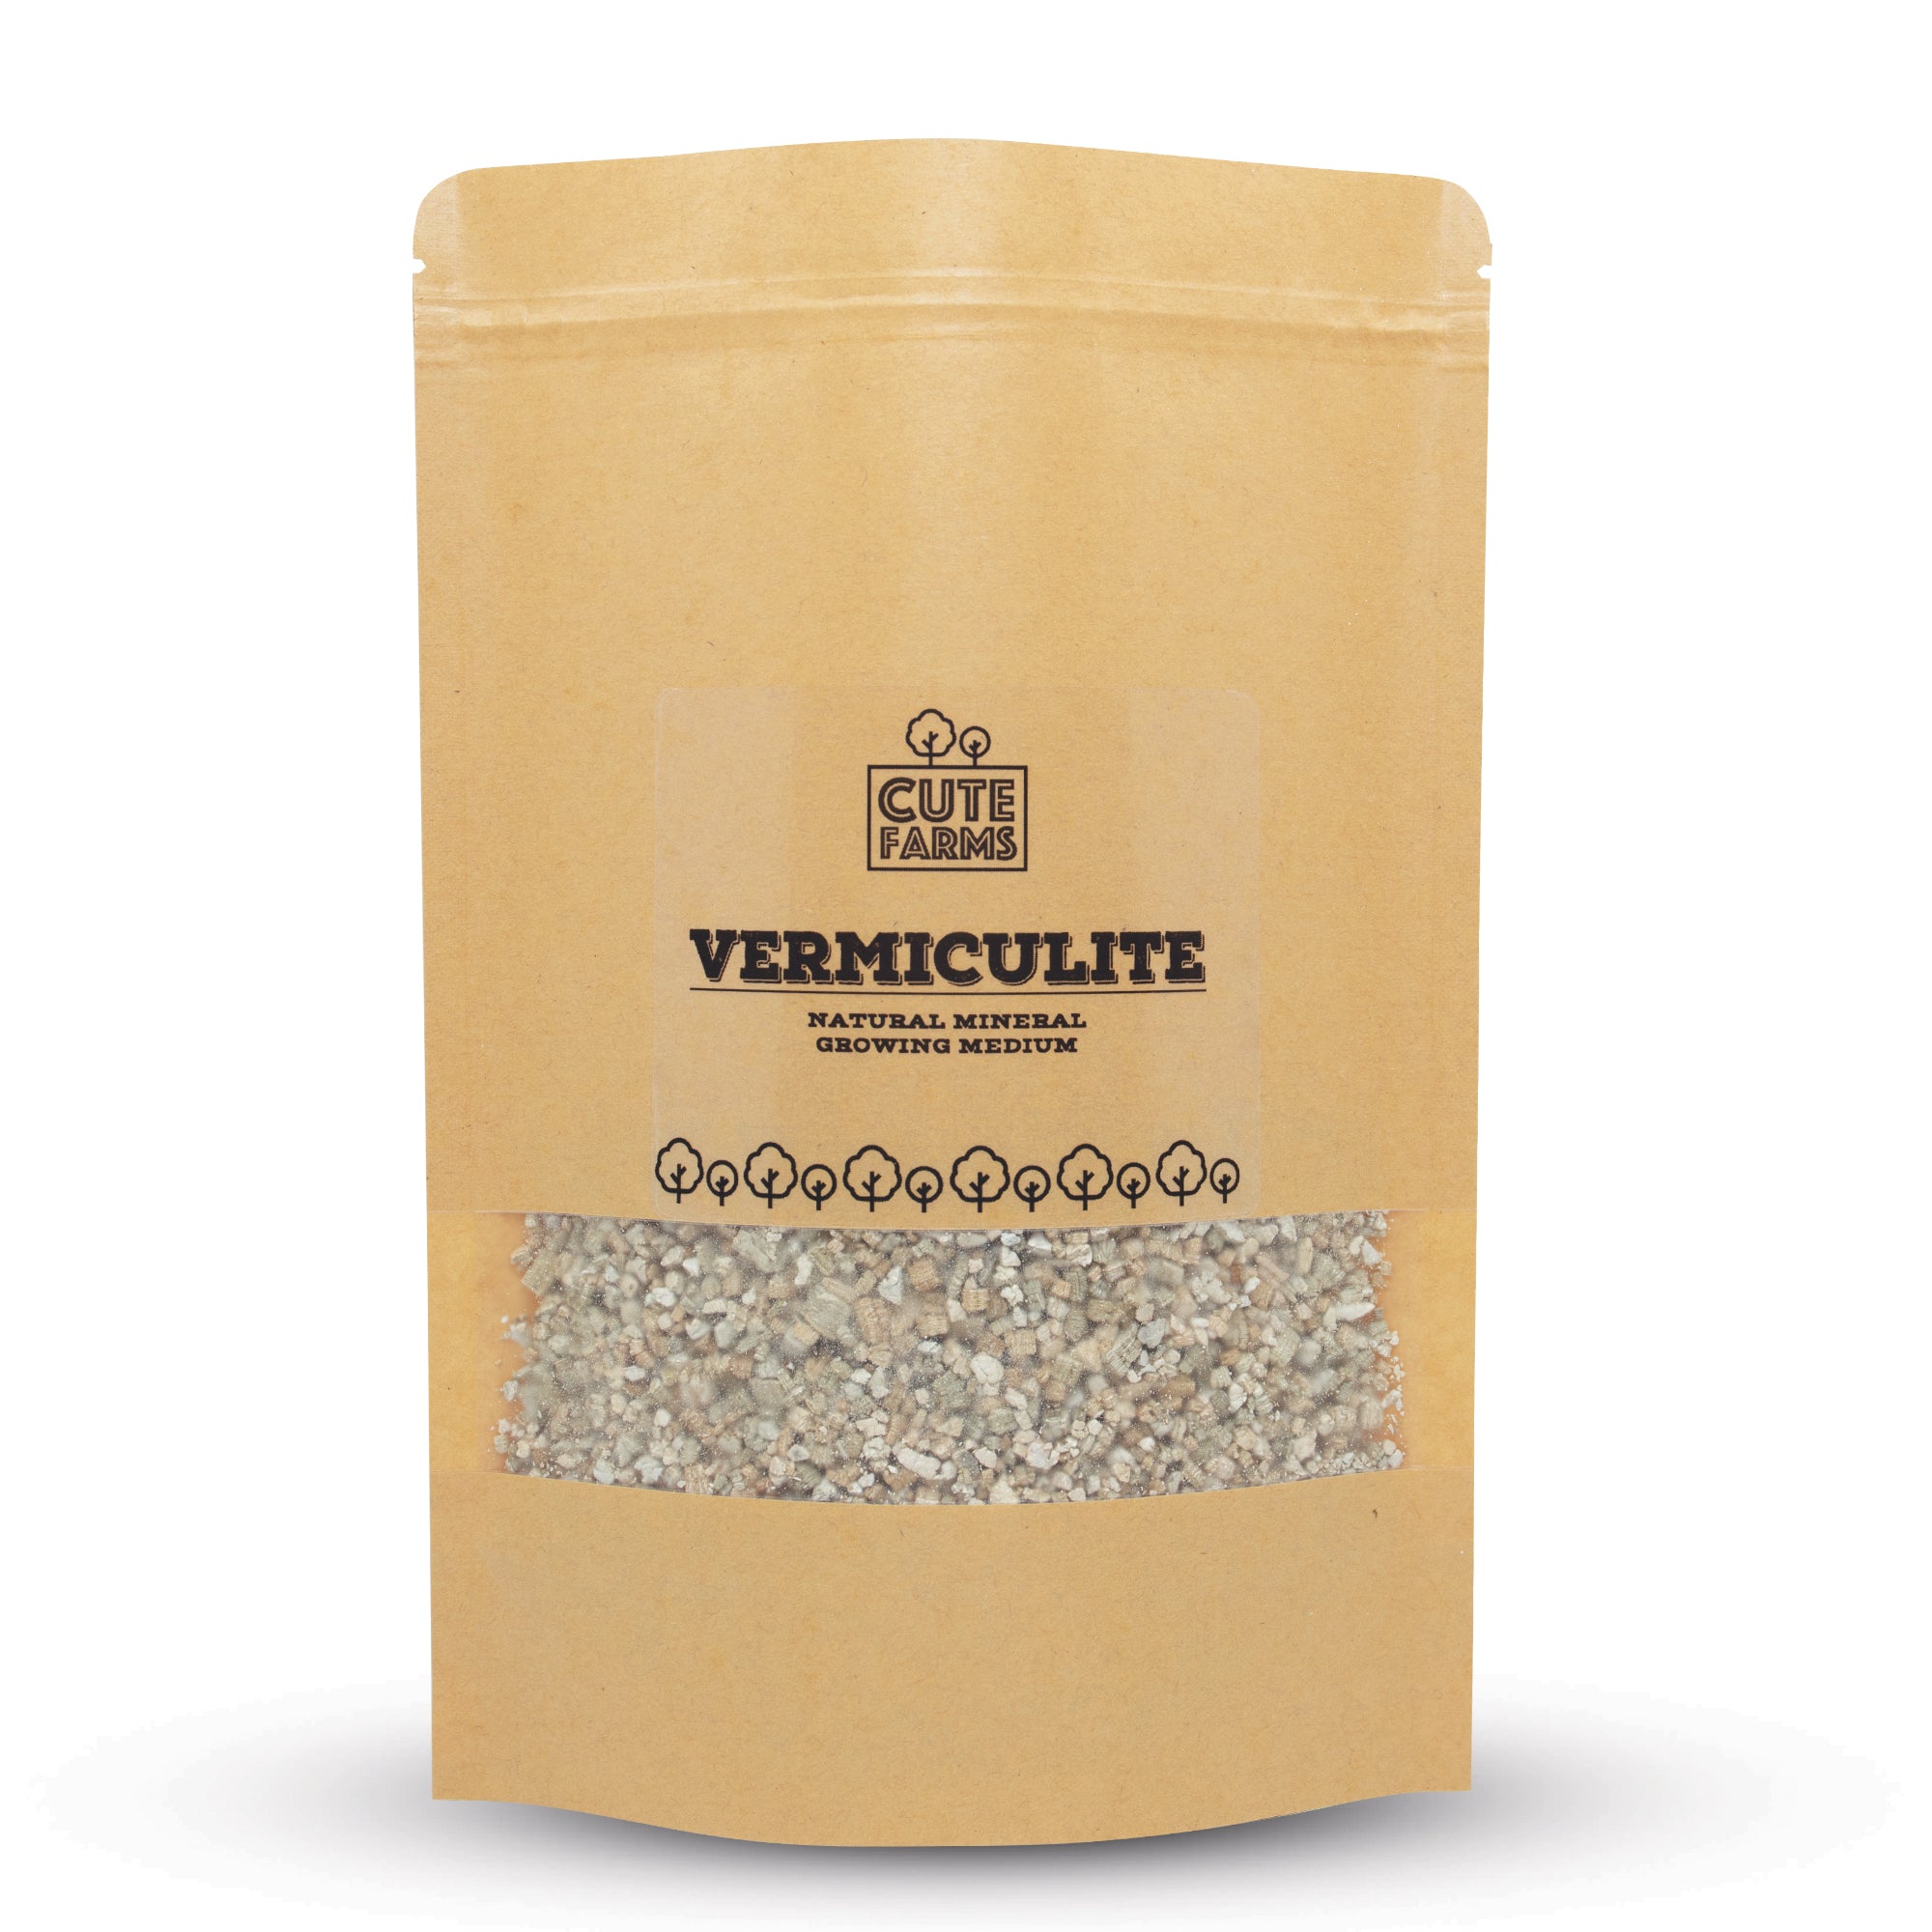 Horticulture Gardening Vermiculite - Growing Medium for Plants and Terrariums